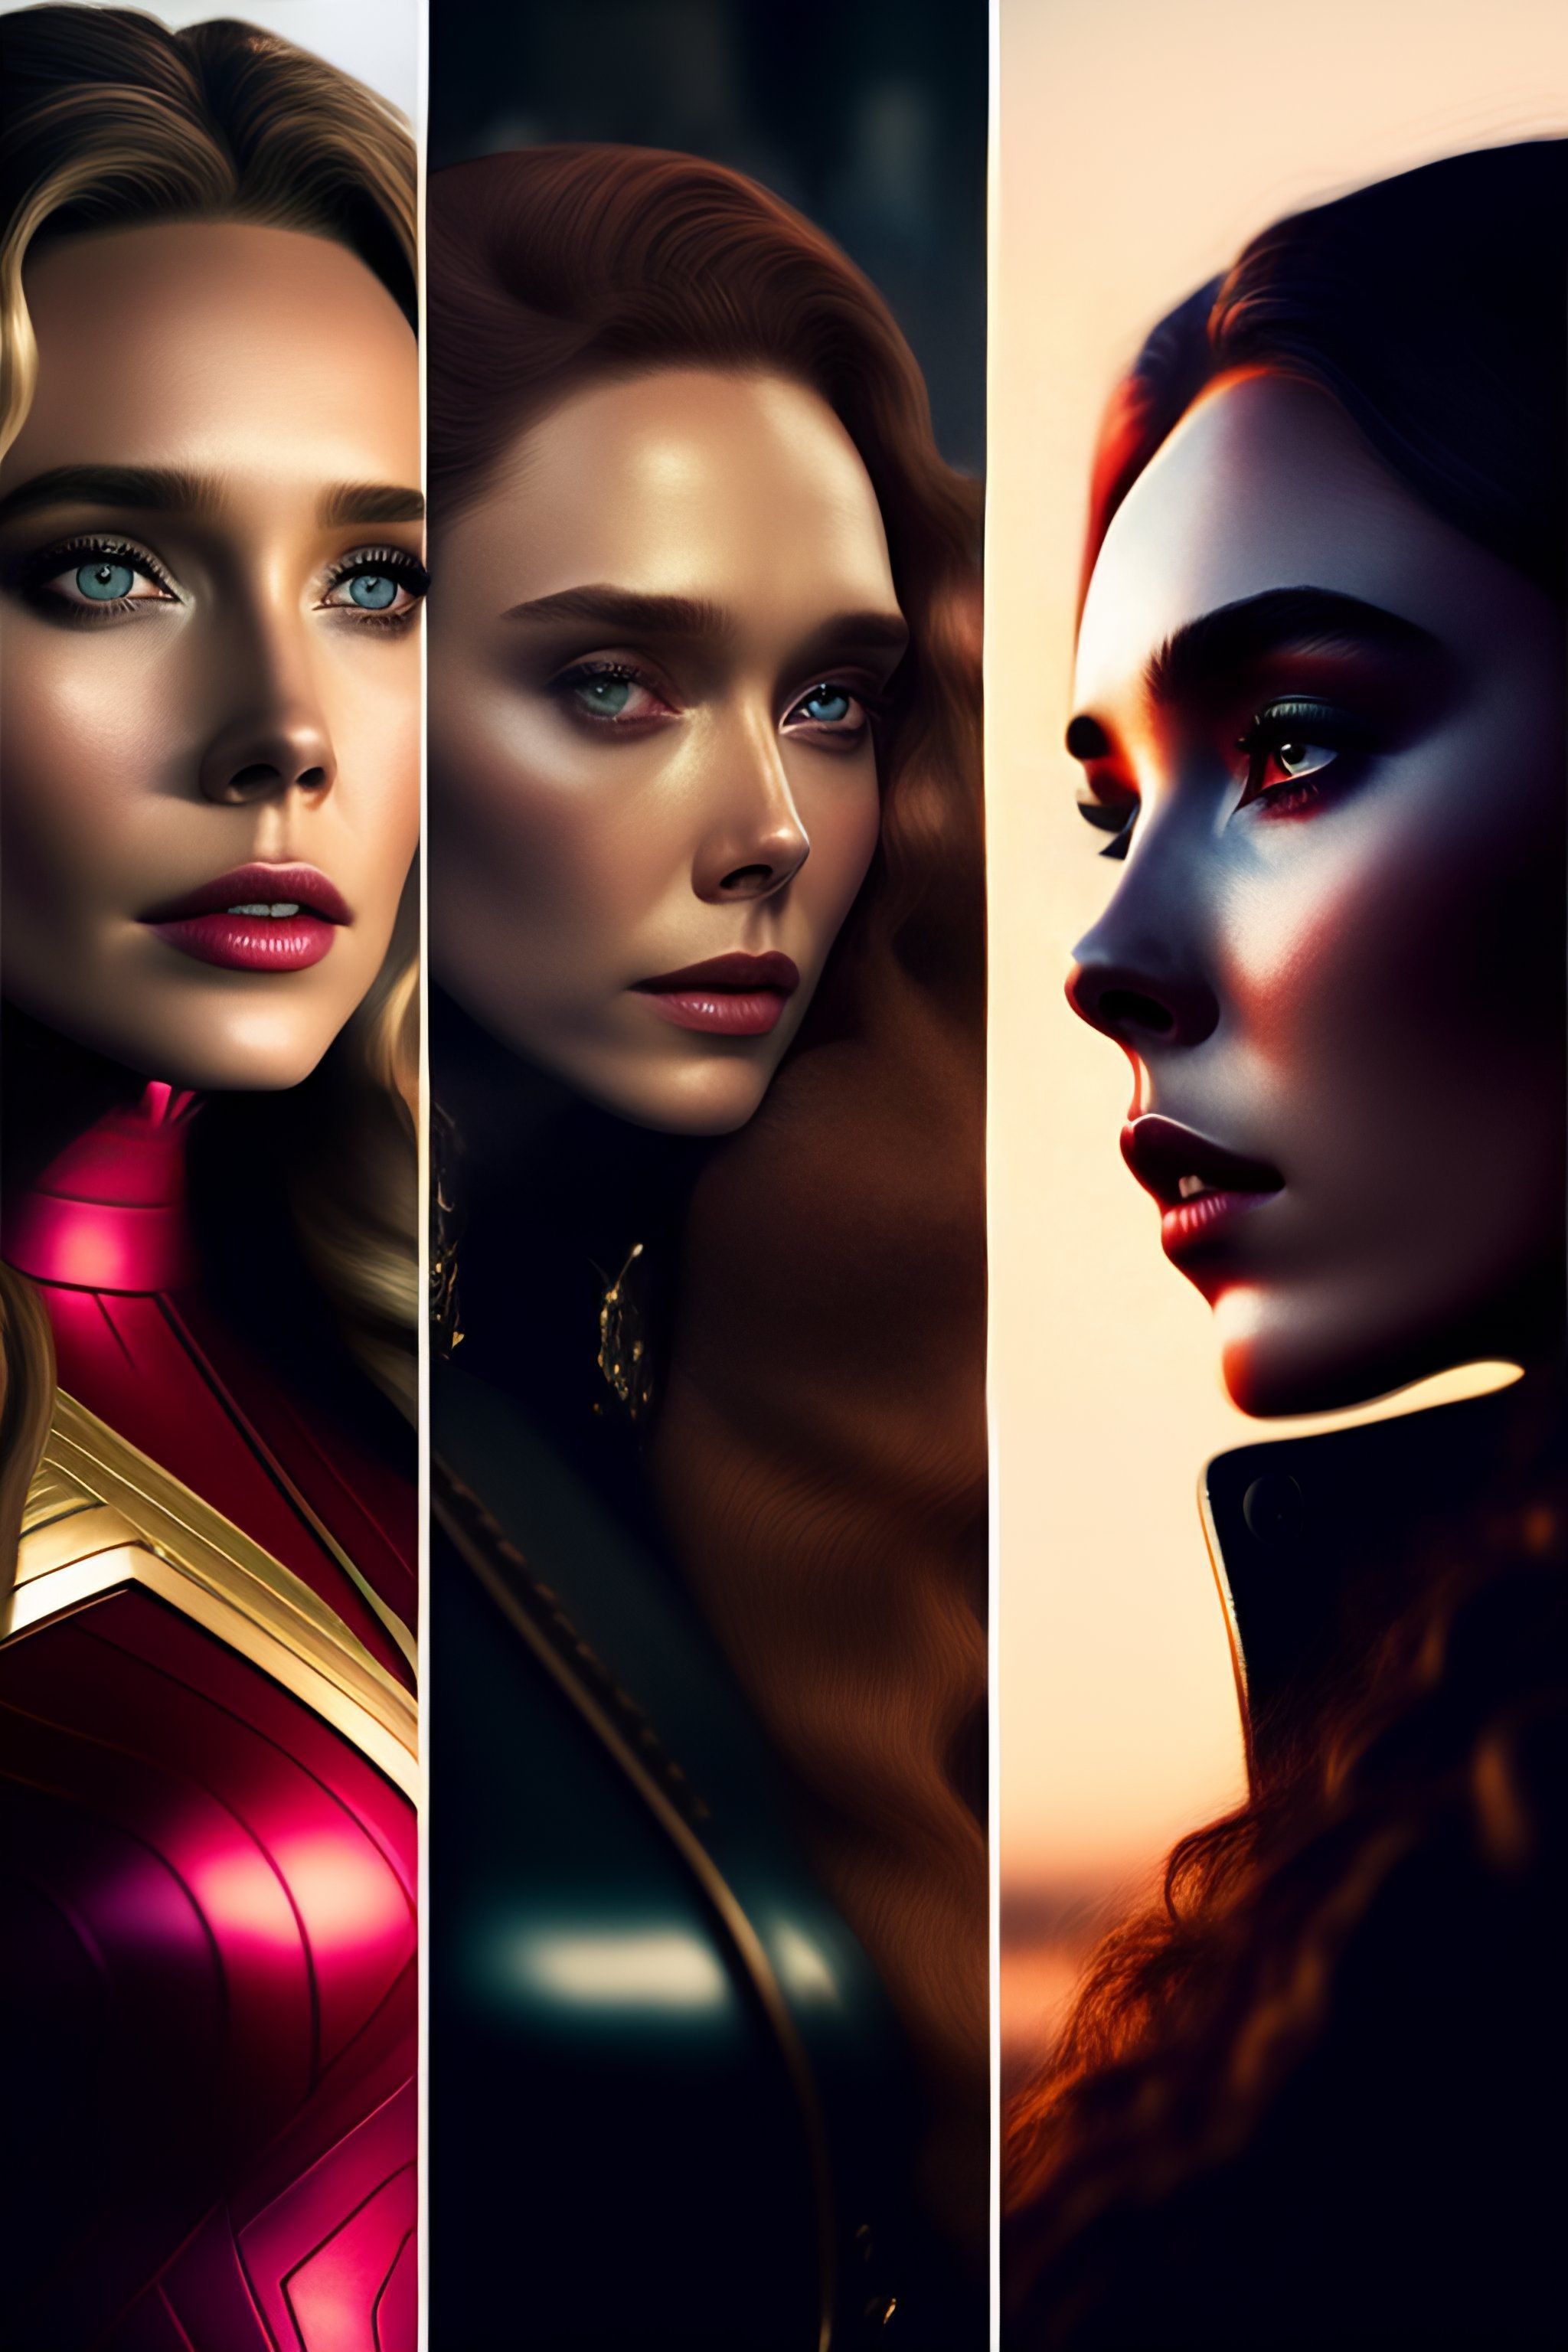 Lexica olsen as wanda maximoff side by side with scarlett johansson and florence pugh as black widow and gal gadot as wonder woman, not a